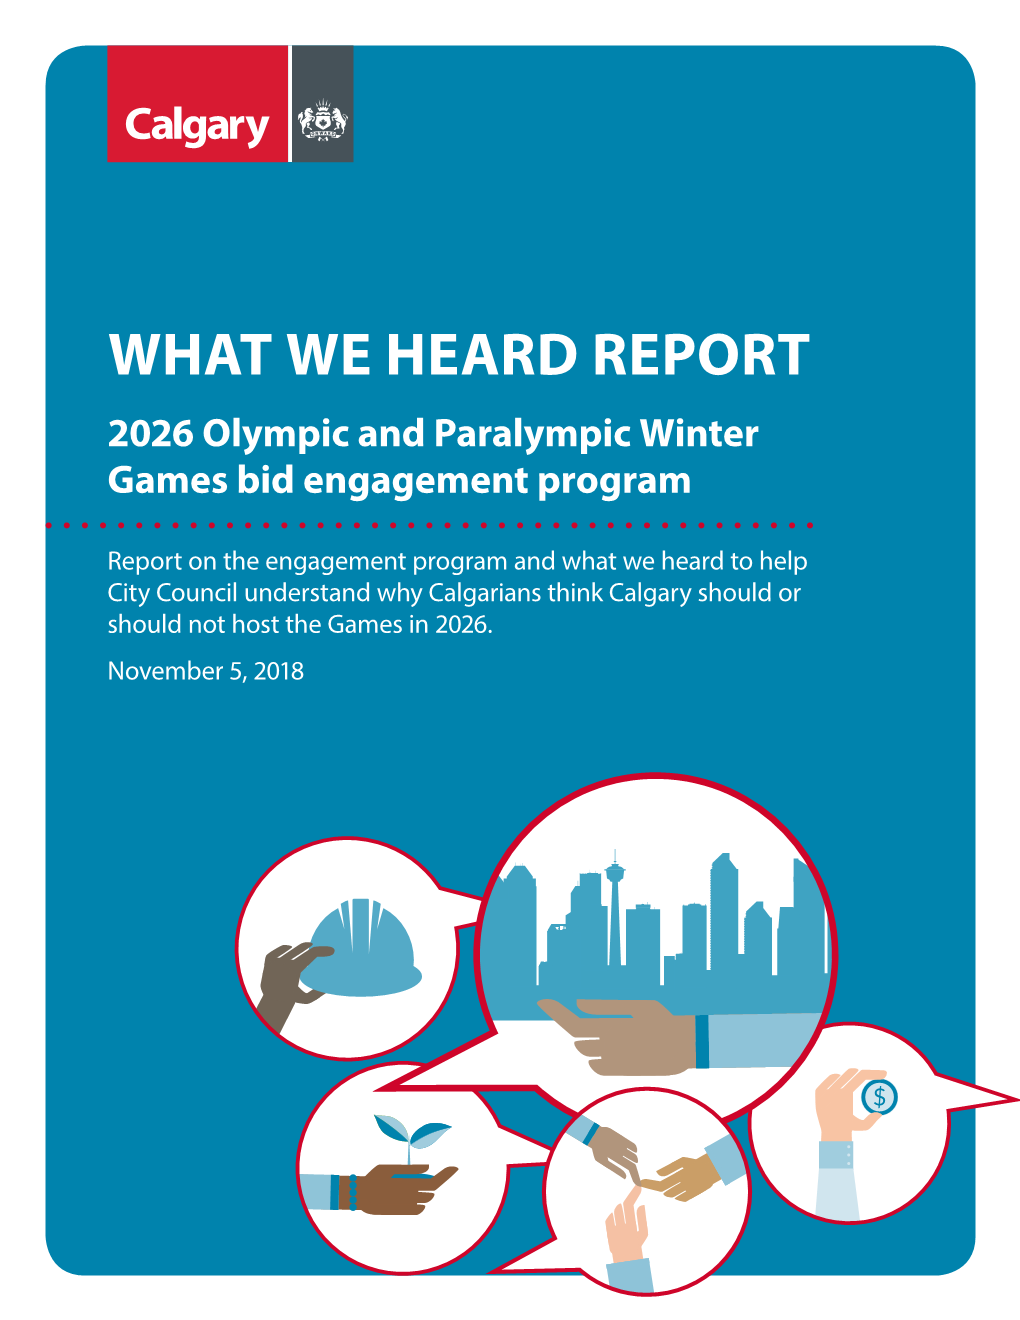 WHAT WE HEARD REPORT 2026 Olympic and Paralympic Winter Games Bid Engagement Program